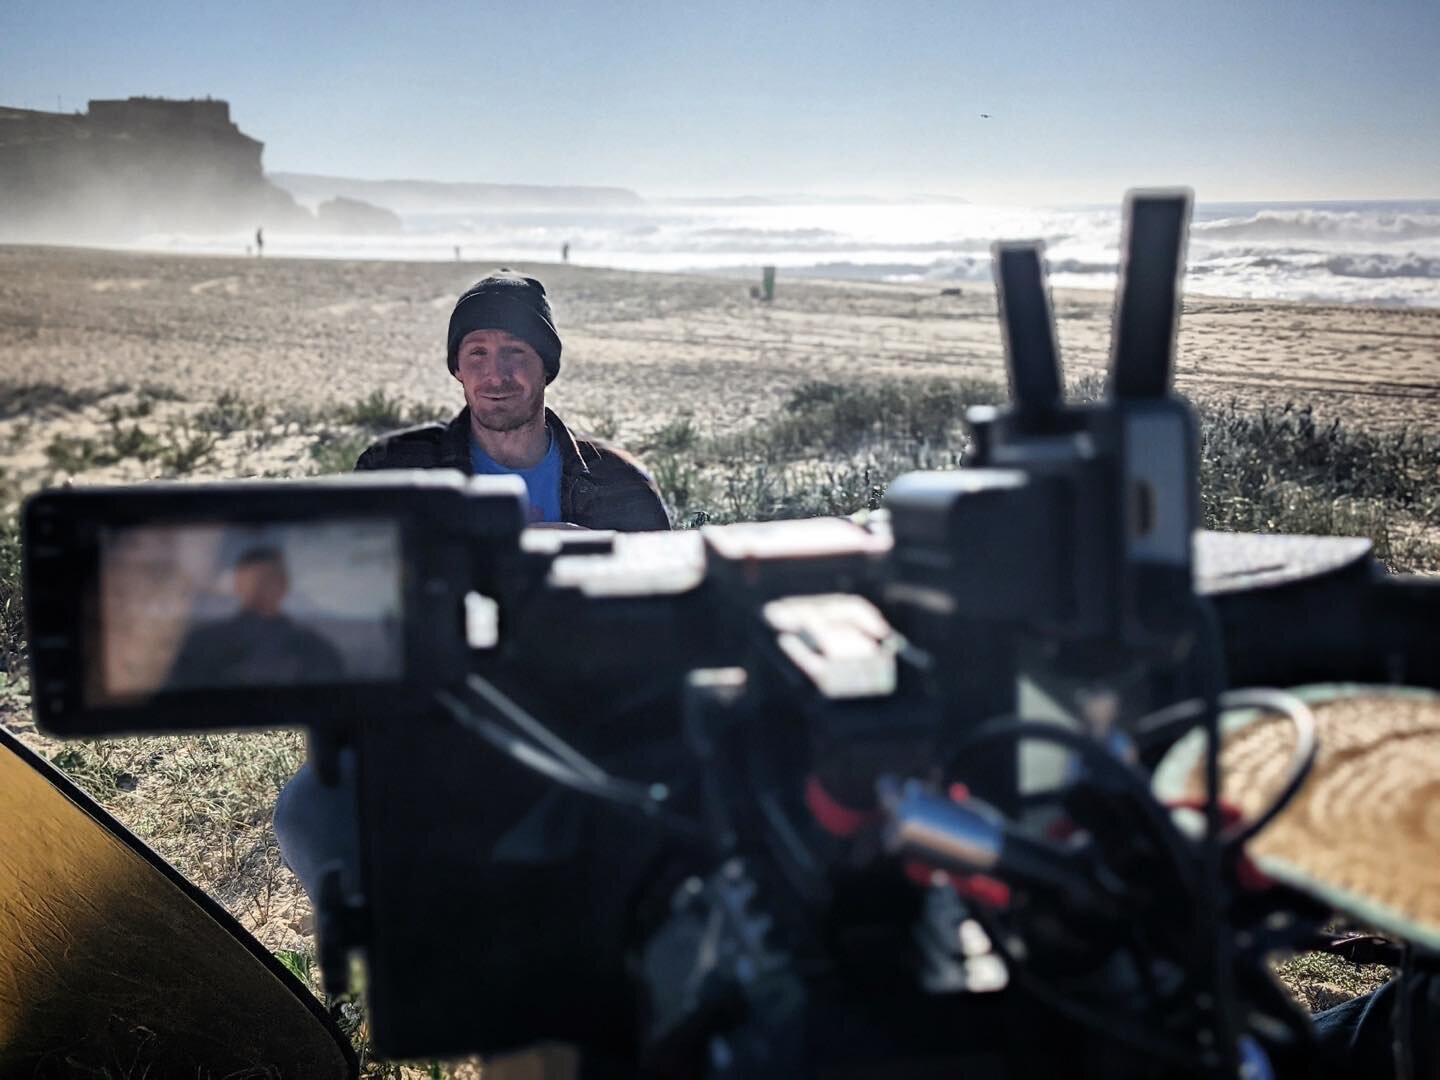 Finally saw the final film from my time in nazare over two seasons filming mega waves&hellip; hopefully coming to the UK soon but available in a lot of other countries on streaming platforms. Fun to finally see it all. 

#megawaves #nazare #bbc #dop 